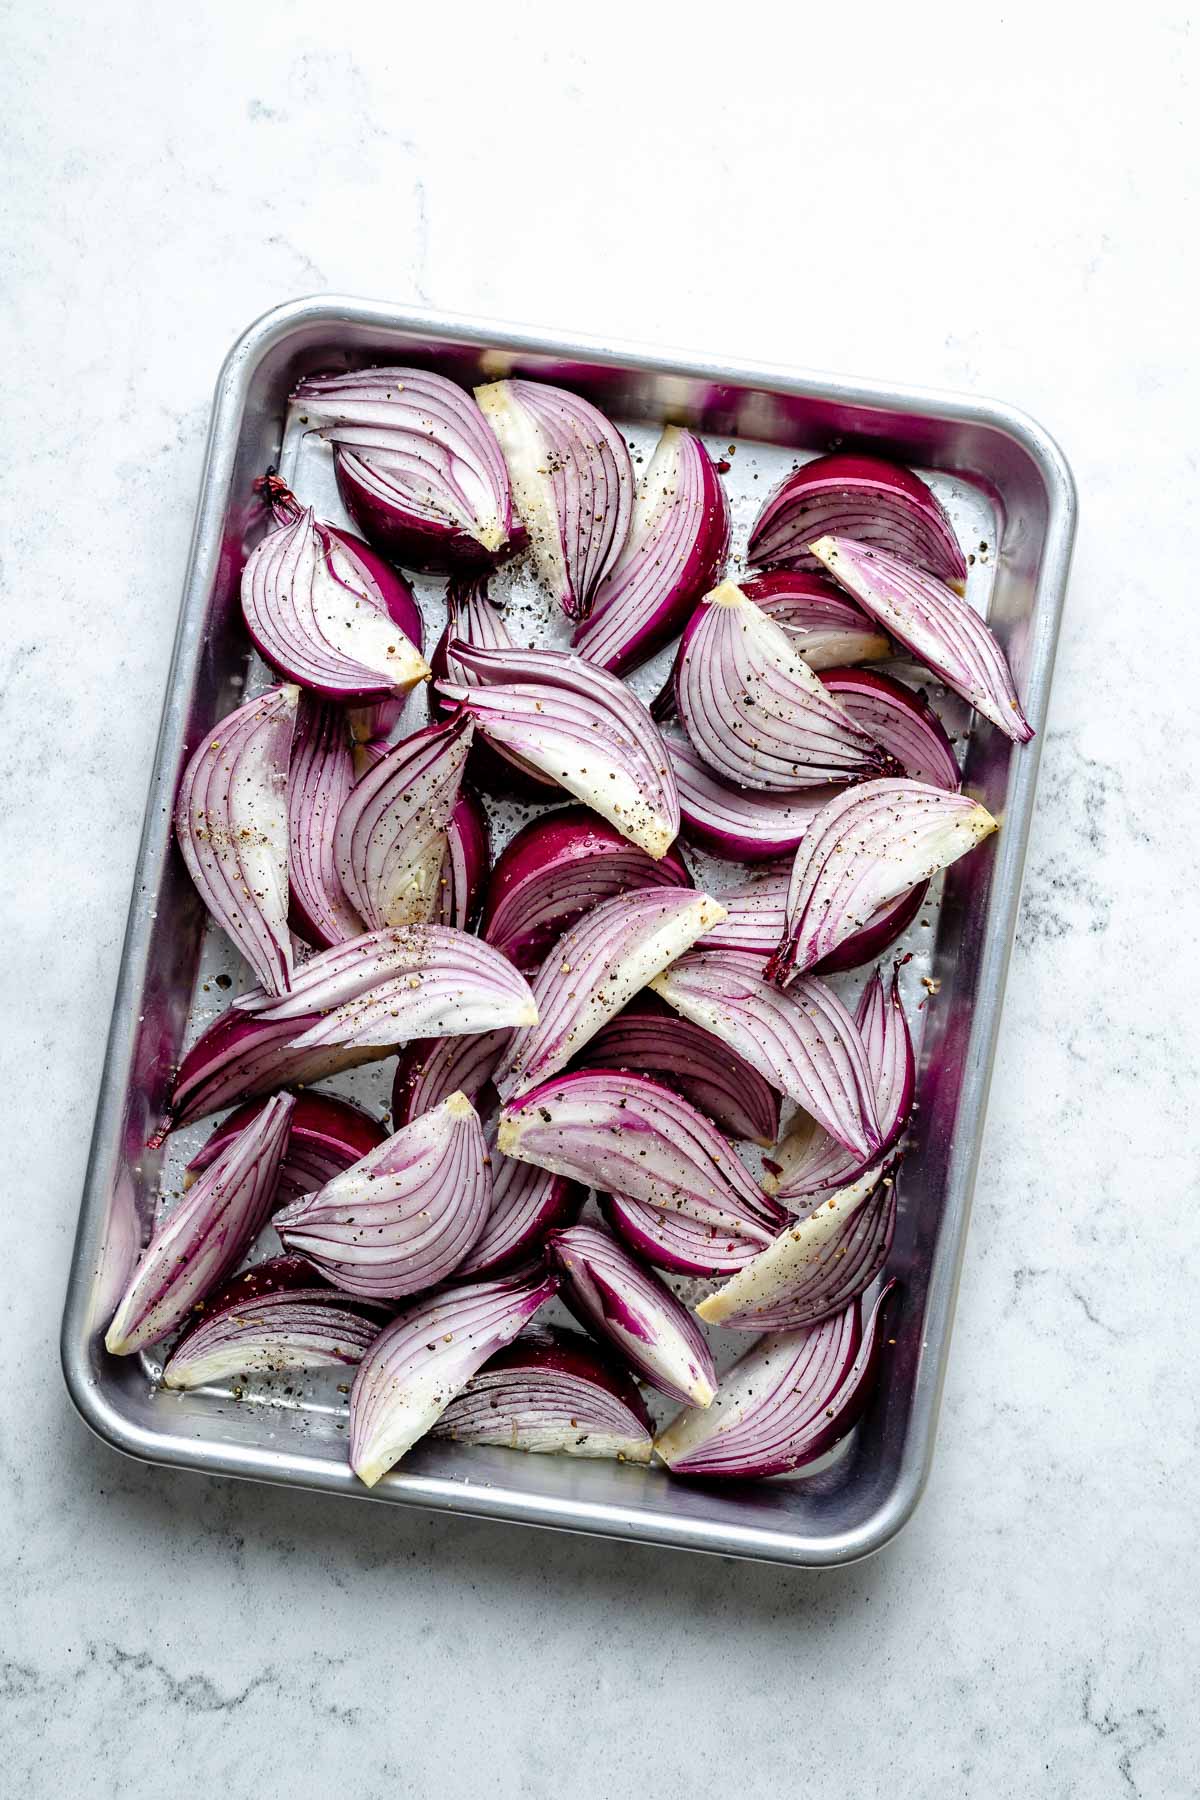 Multiple slices of red onion cut in wedges & seasoned with avocado oil, kosher salt, & ground black pepper arranged on an aluminum baking sheet. The baking sheet sits on top of a white & gray marble surface.